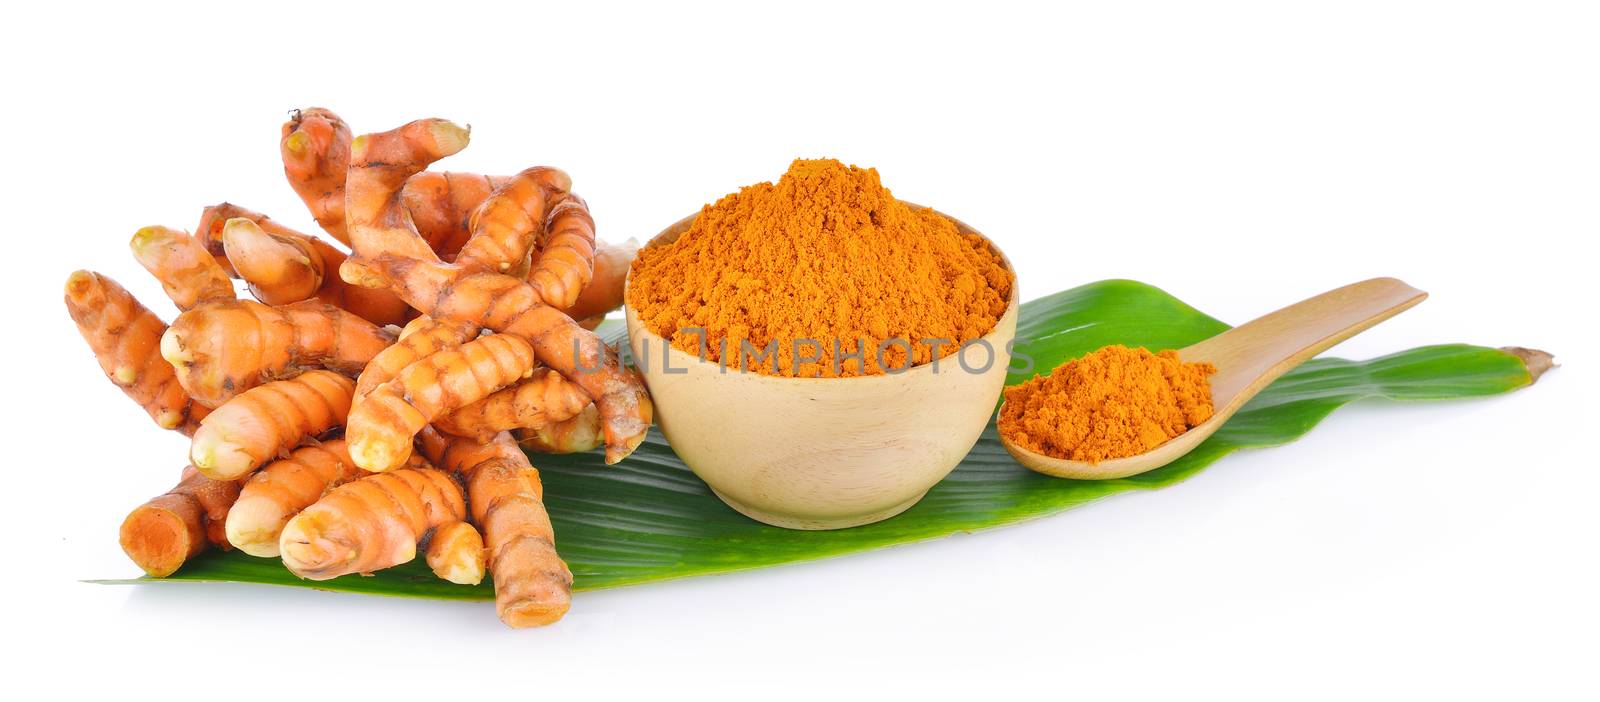 turmeric root and dry tumeric in wood bowl on white background by sommai